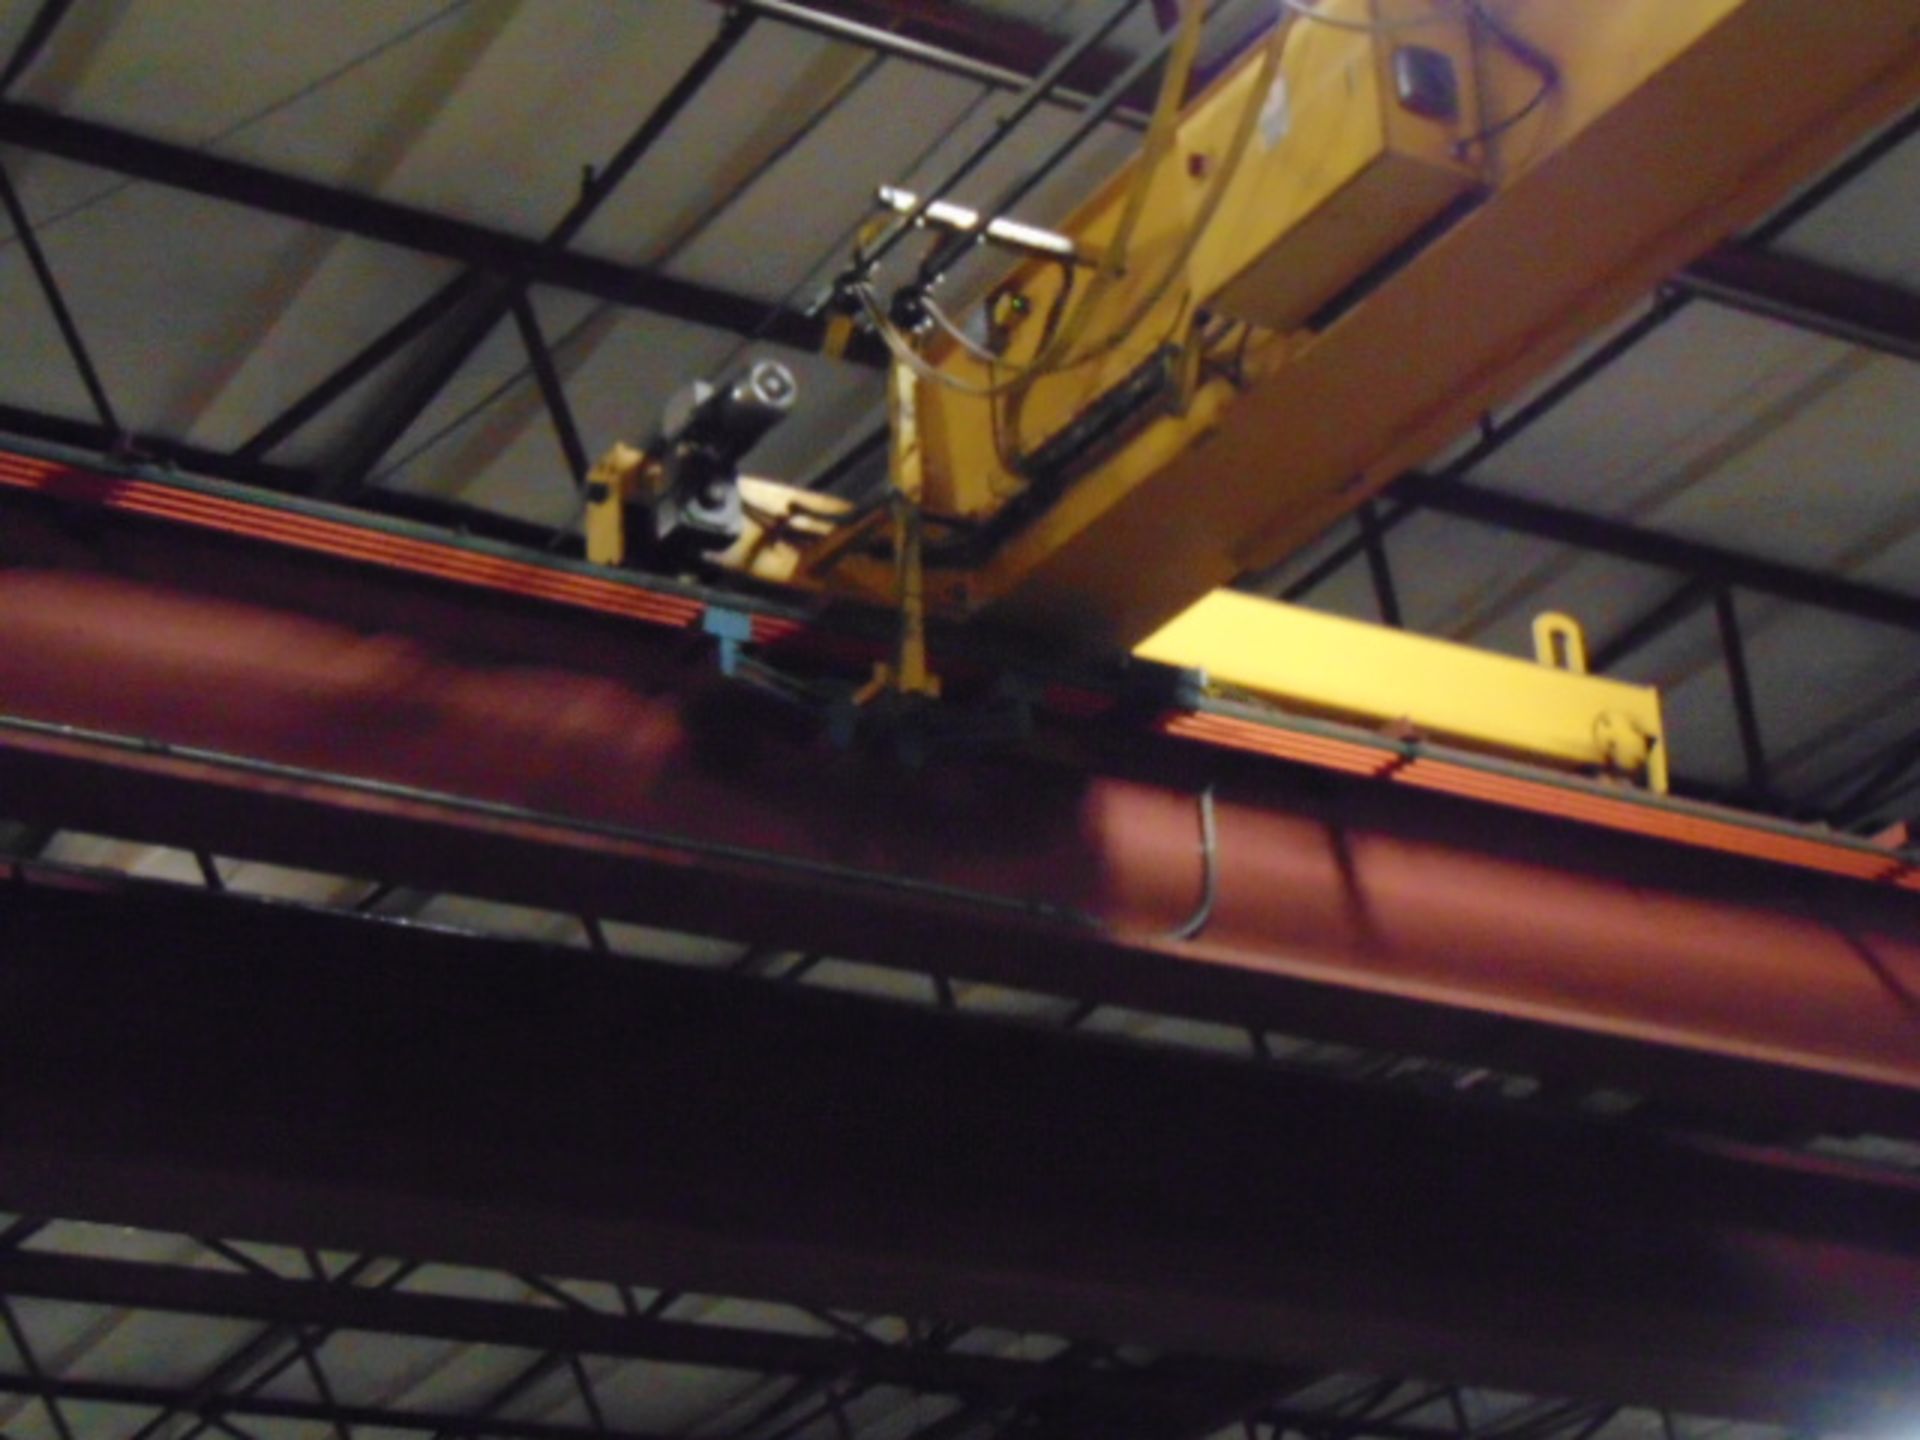 FREE STANDING CRANE SYSTEM, OMI 5 T. CAP., new 2012, approx. 44’ span, 350’L., 16’-8” ht. under - Image 10 of 13